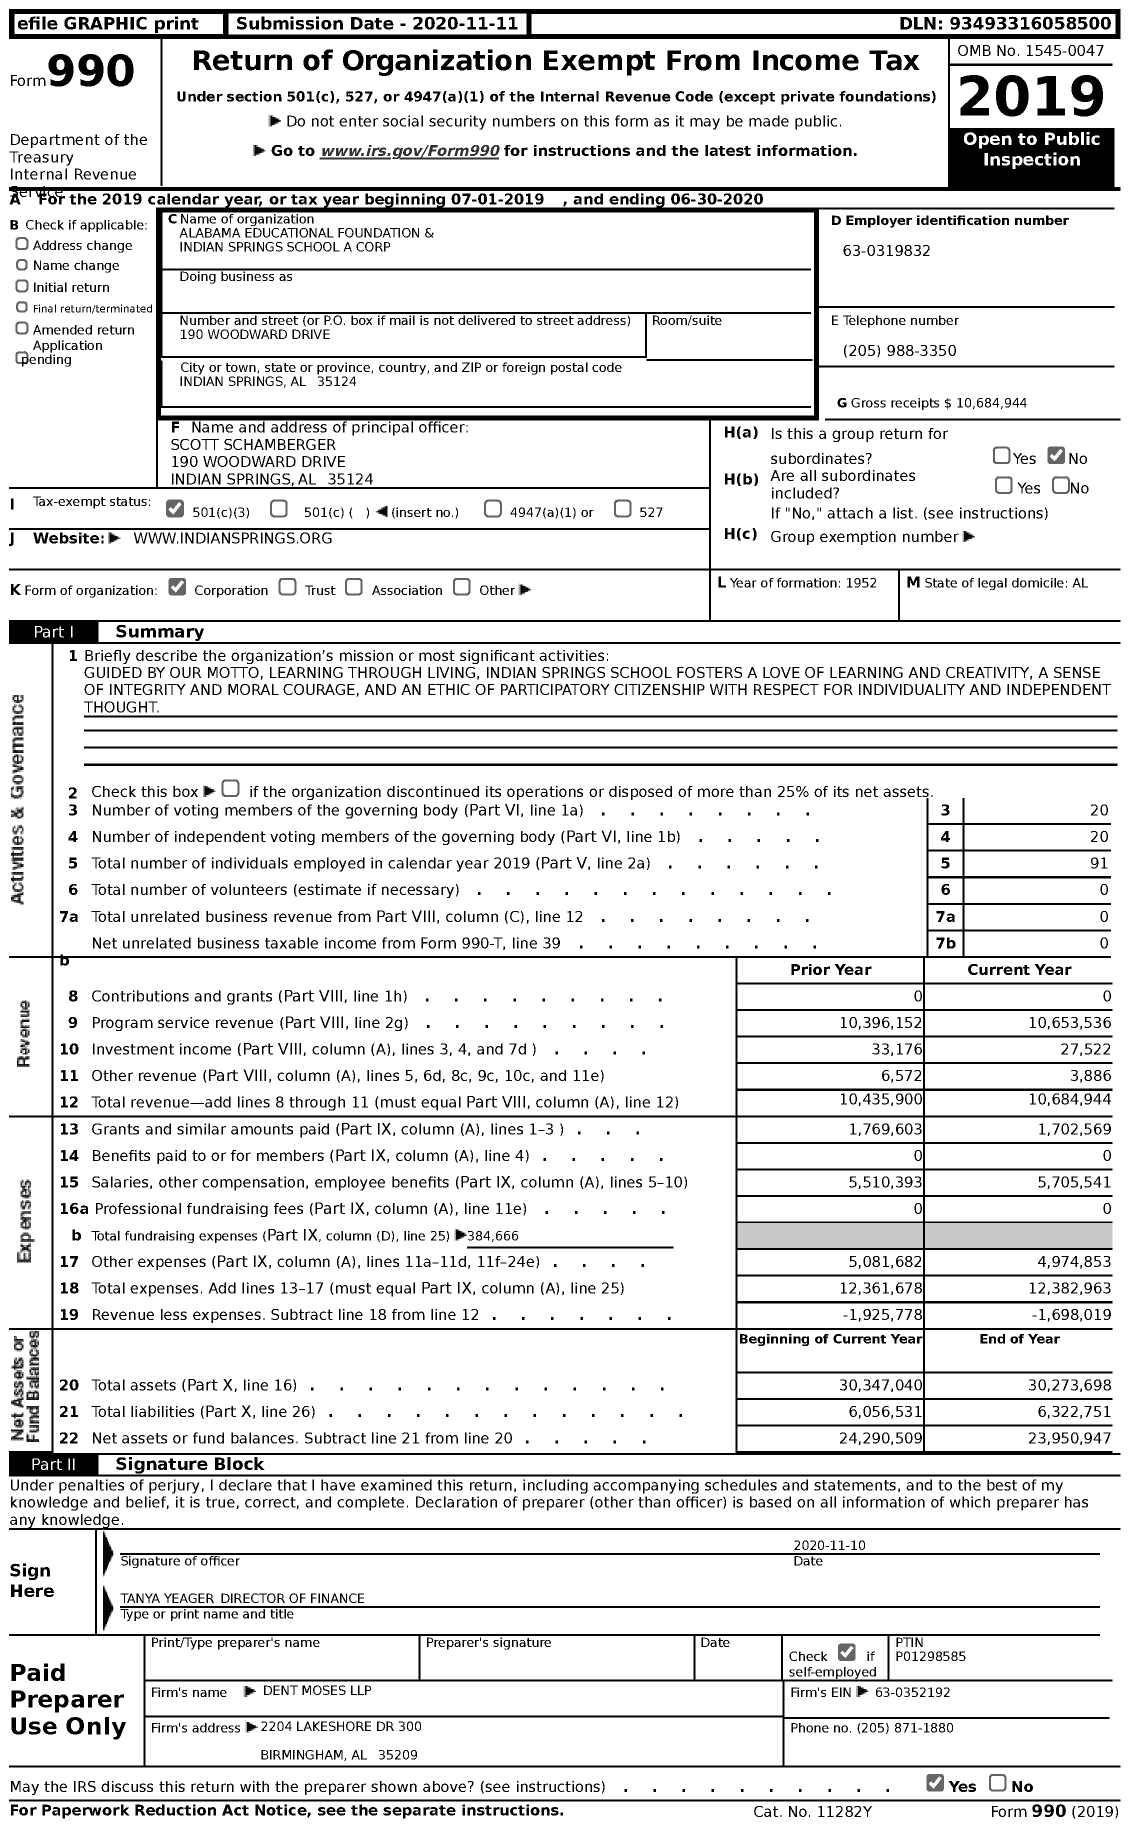 Image of first page of 2019 Form 990 for Alabama Educational Foundation and Indian Springs School A Corporation